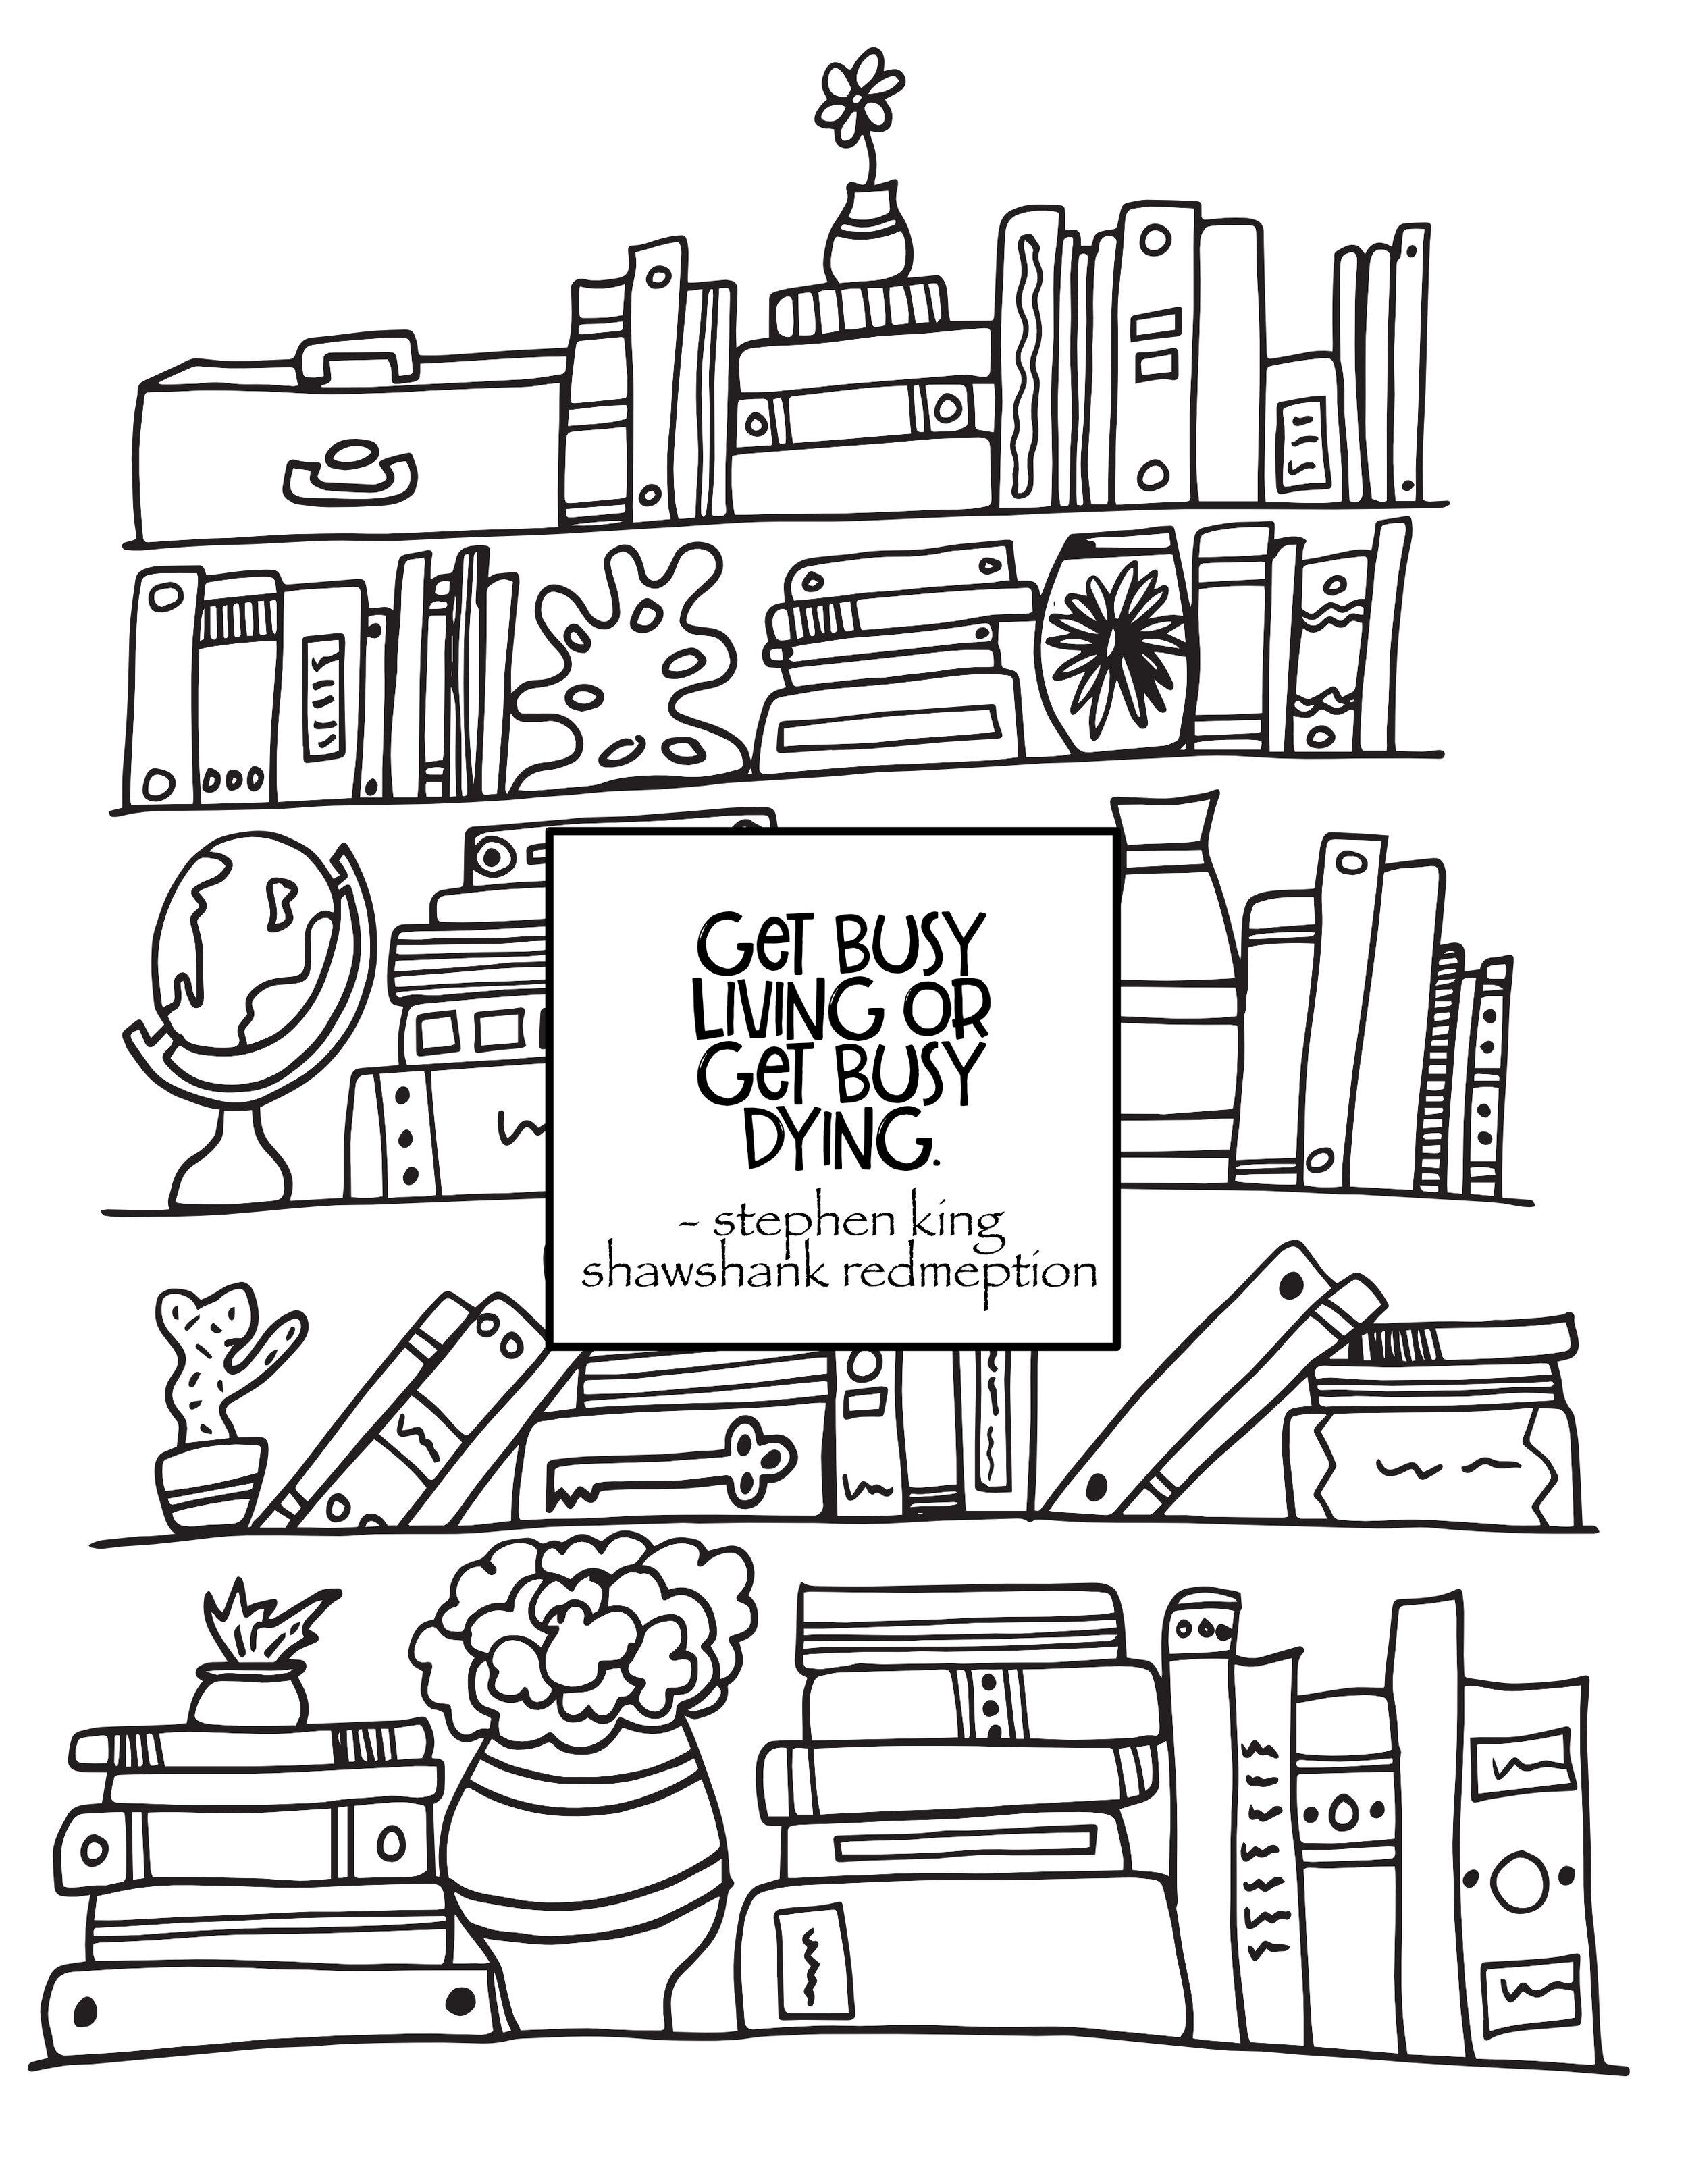 bookshelf with get busy living or get busy dying quote free coloring page